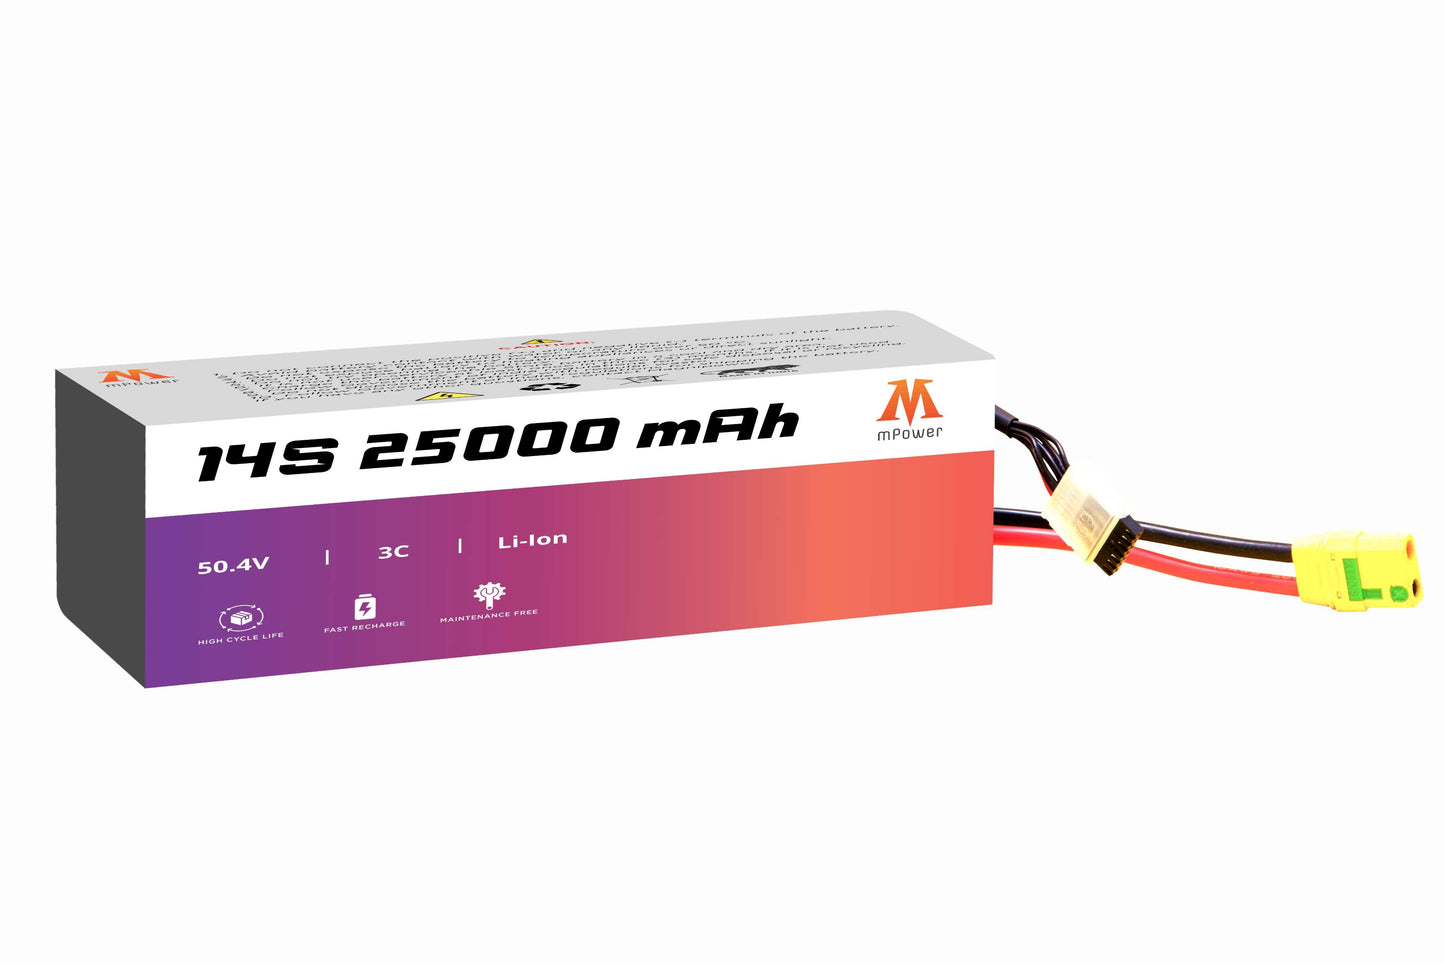 mPower 14S 25000mAh Lithium-Ion Battery for Survey Drones